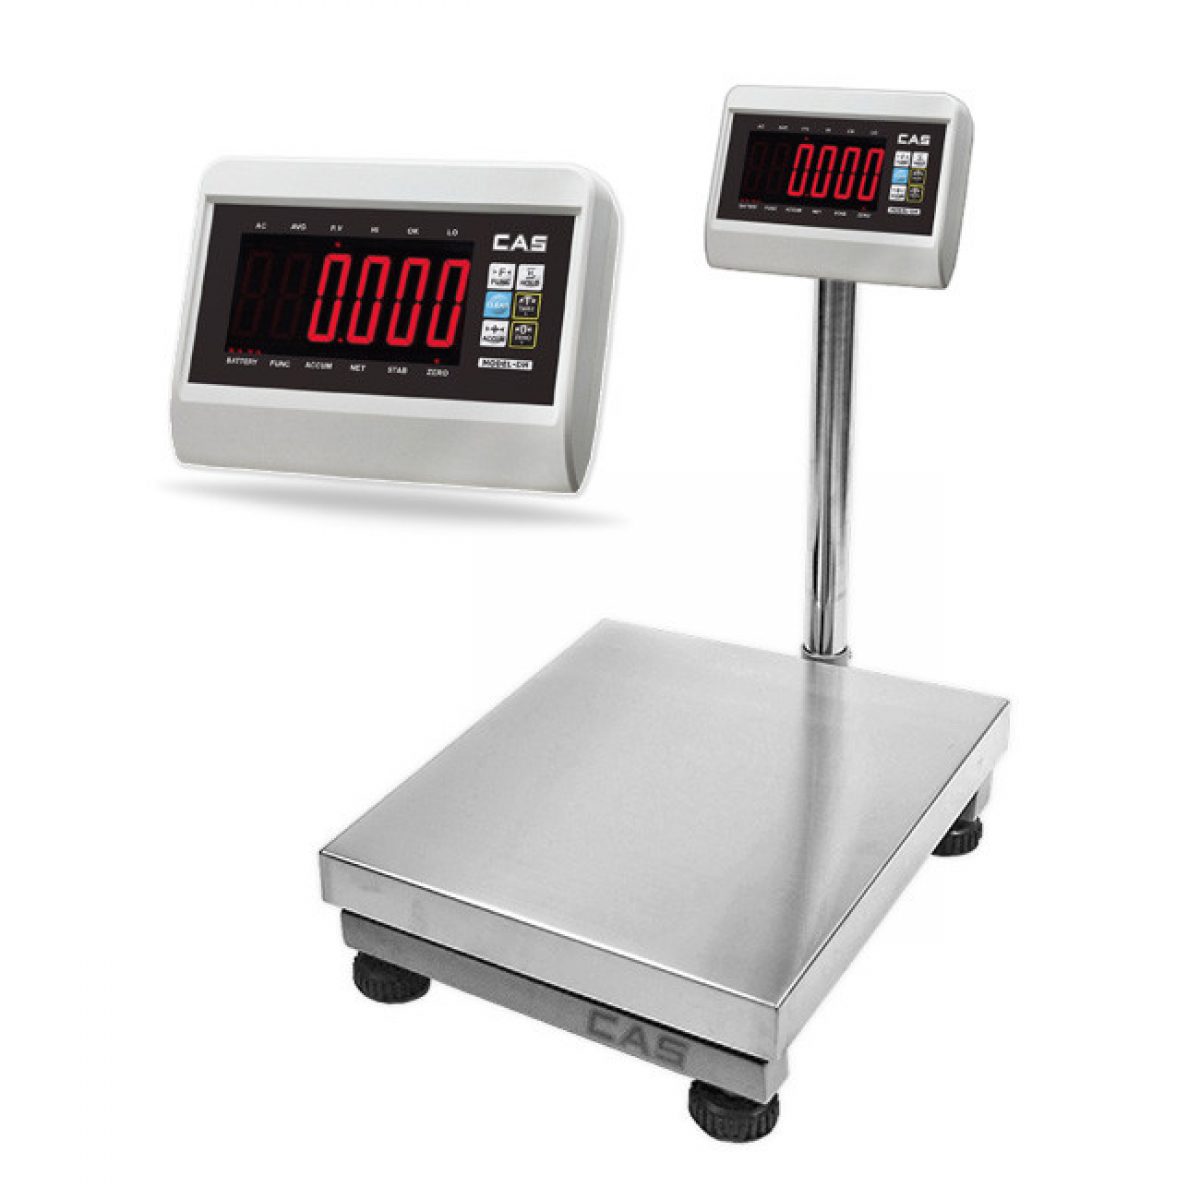 Metra H01 - BMI Height and Weight Scale Supplier in Dubai, Abu Dhabi,  Sharjah - Petra - UAE Weighing Equipment Division